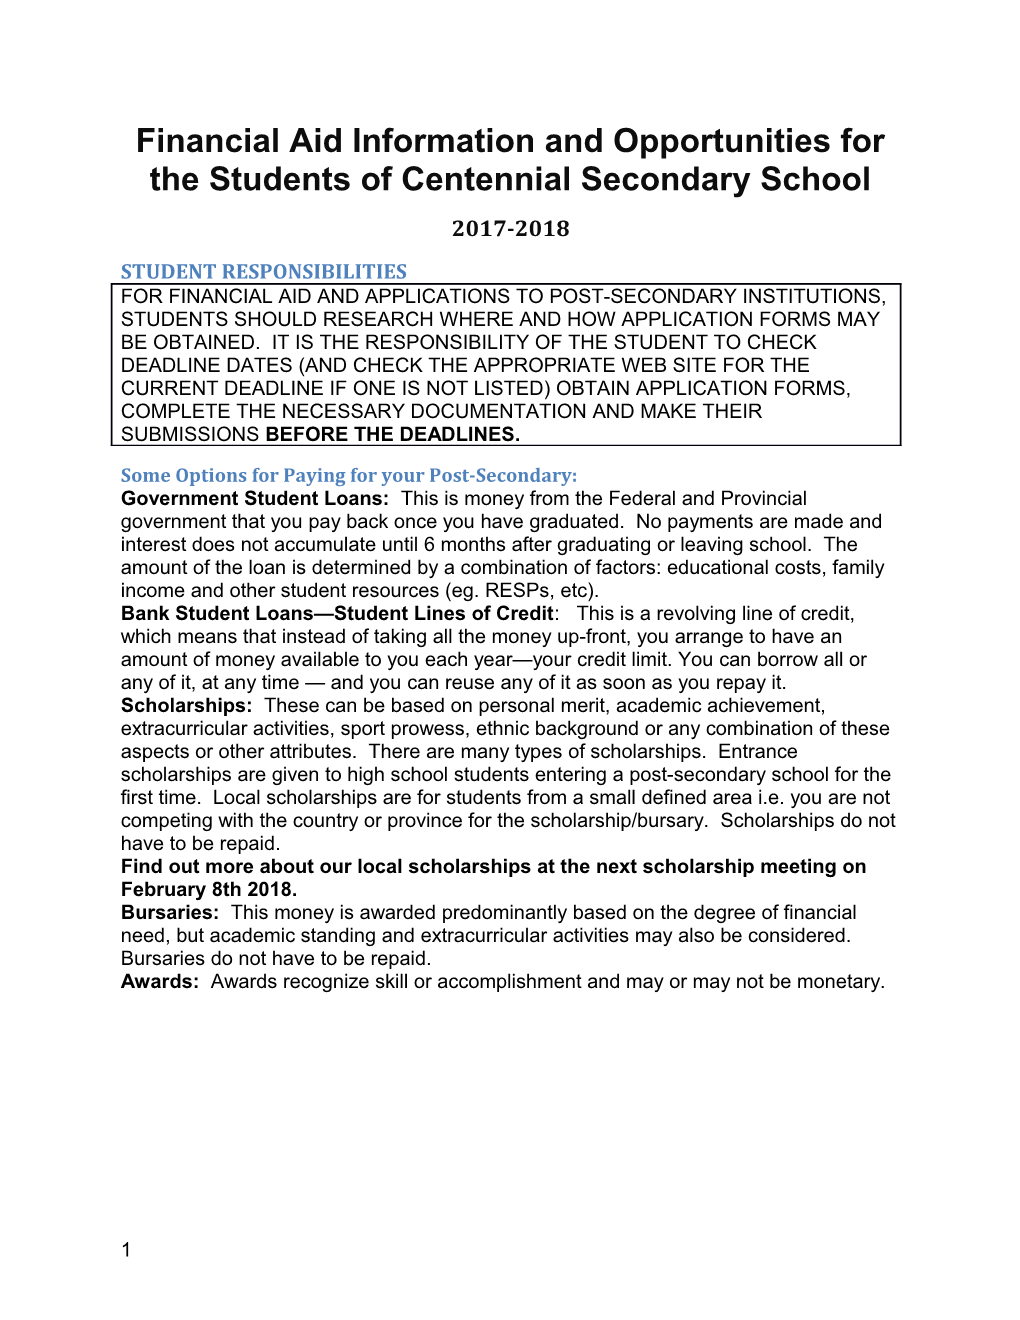 Financial Aid Information and Opportunities for the Students of Centennial Secondary School